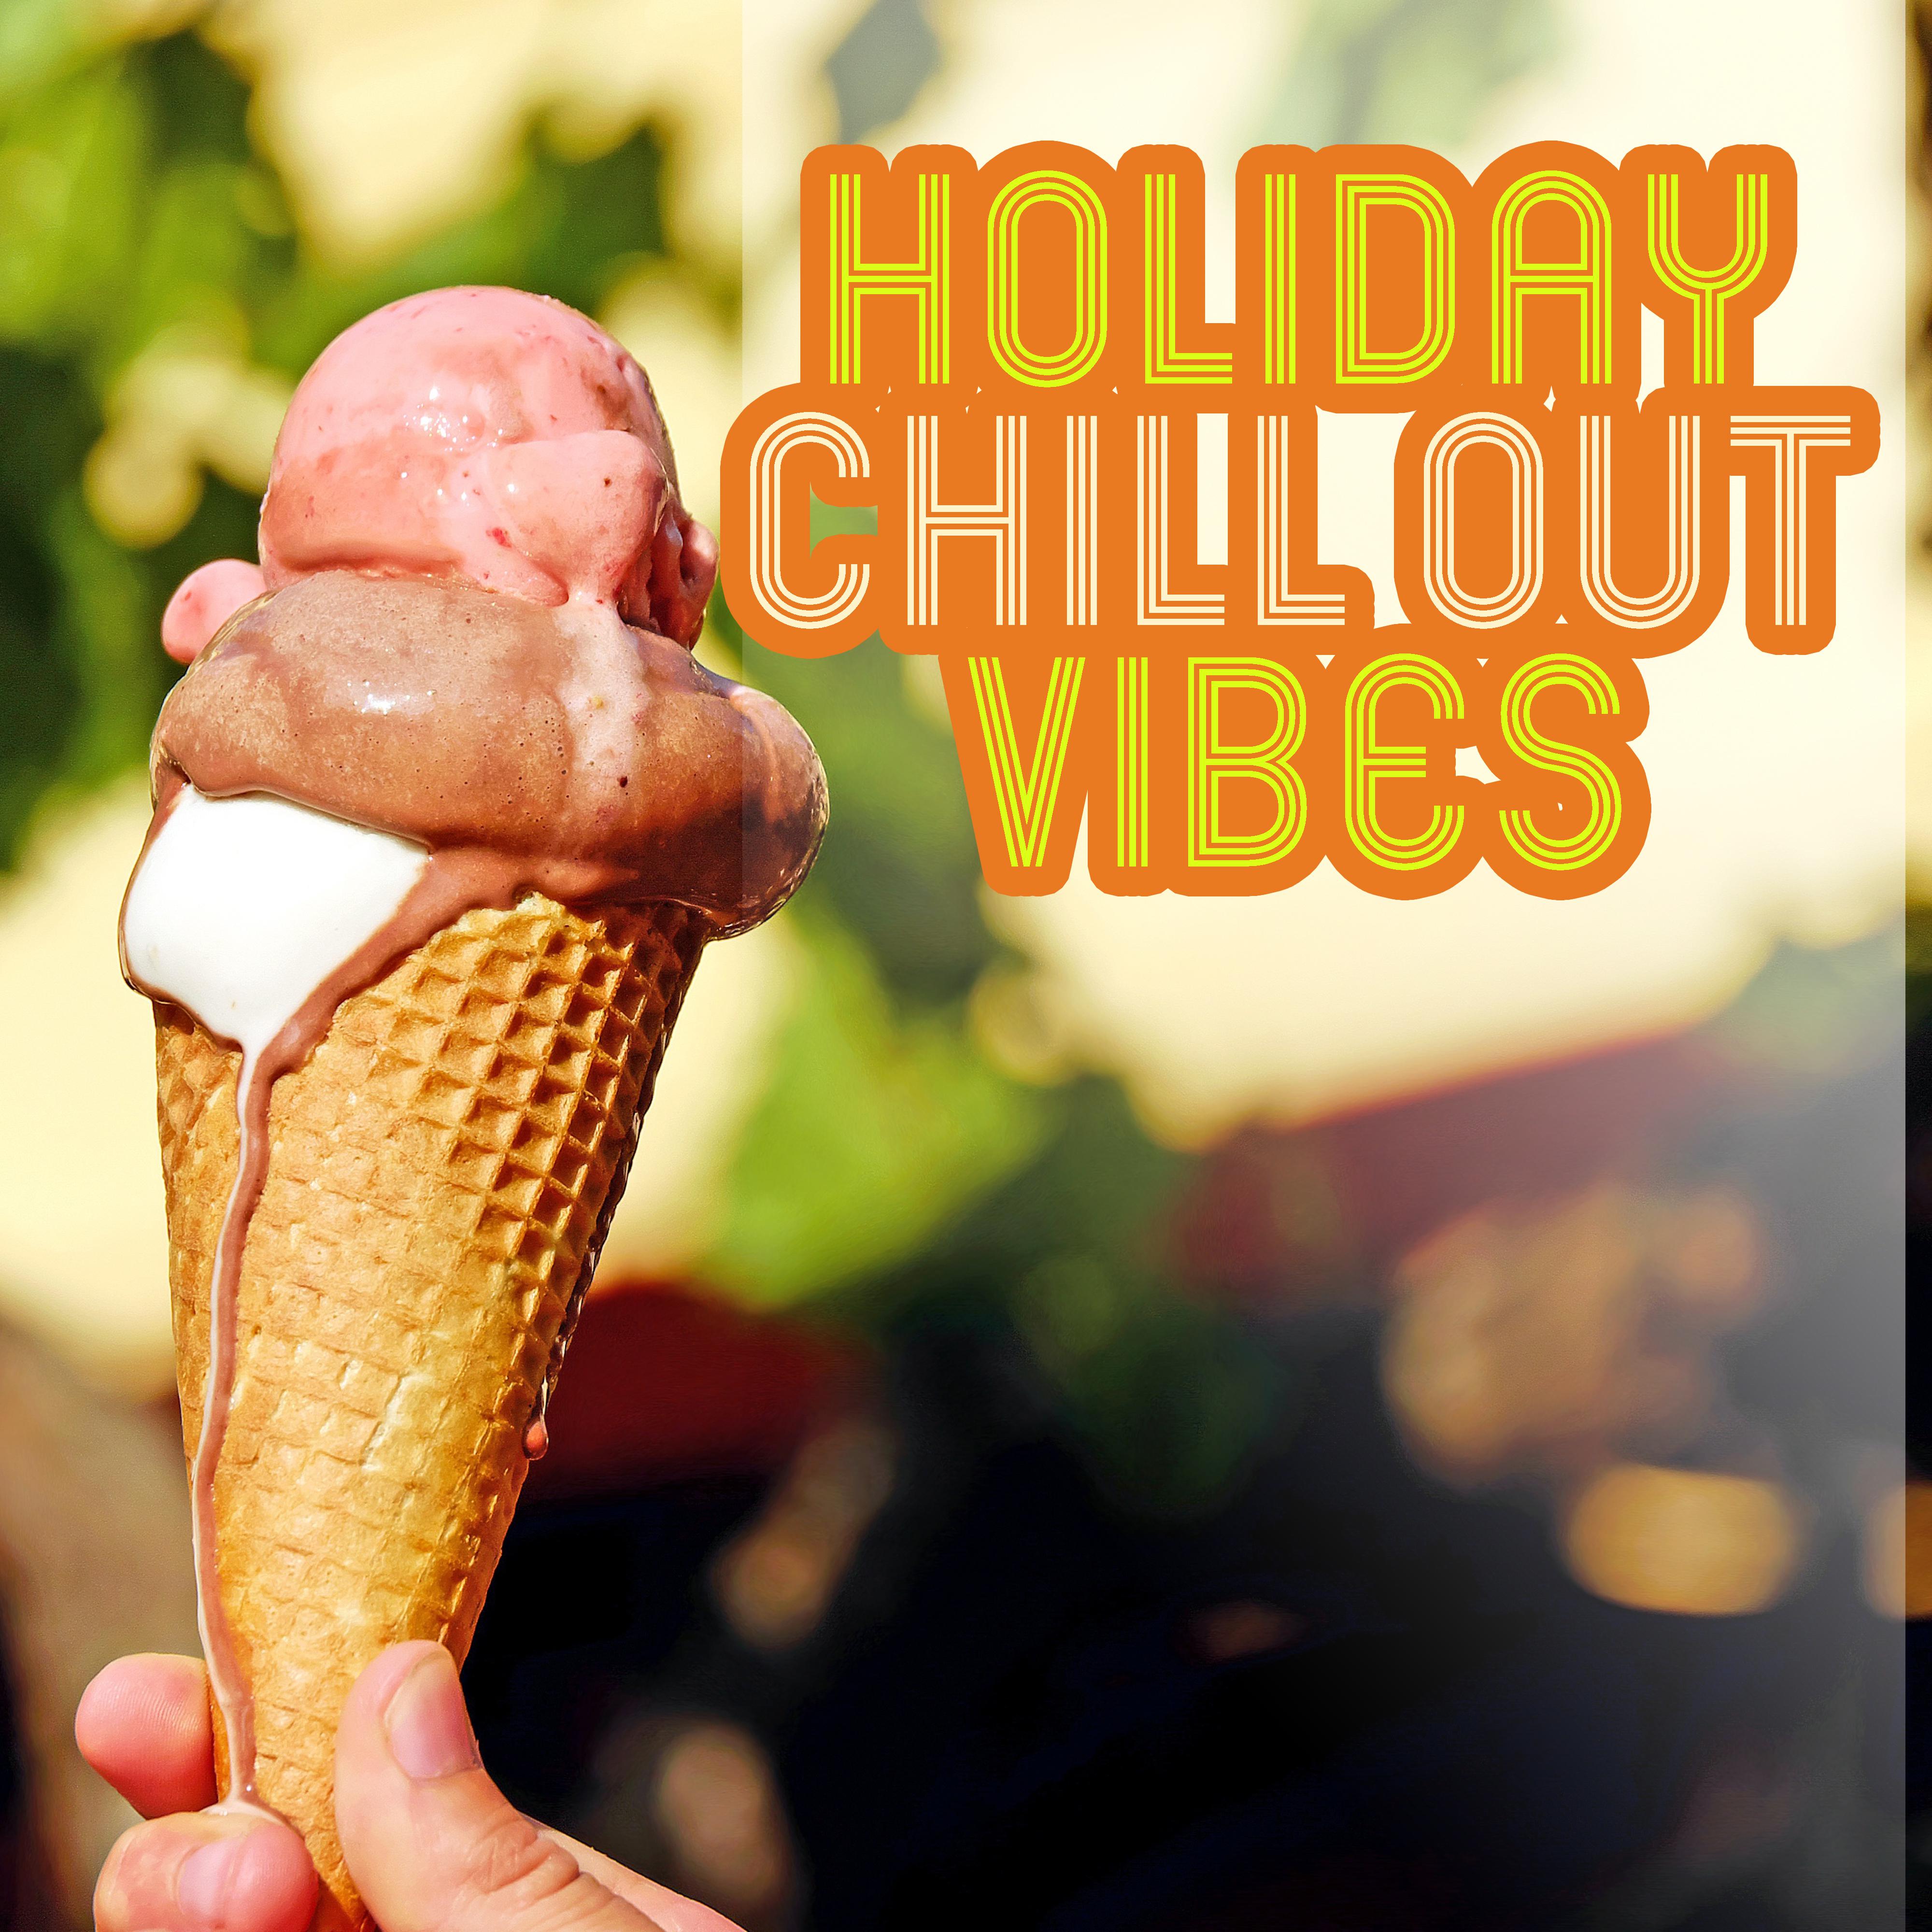 Holiday Chill Out Vibes  Chill Out Music, Summer Beach Rest, Easy Listening, Spiritual Calmness